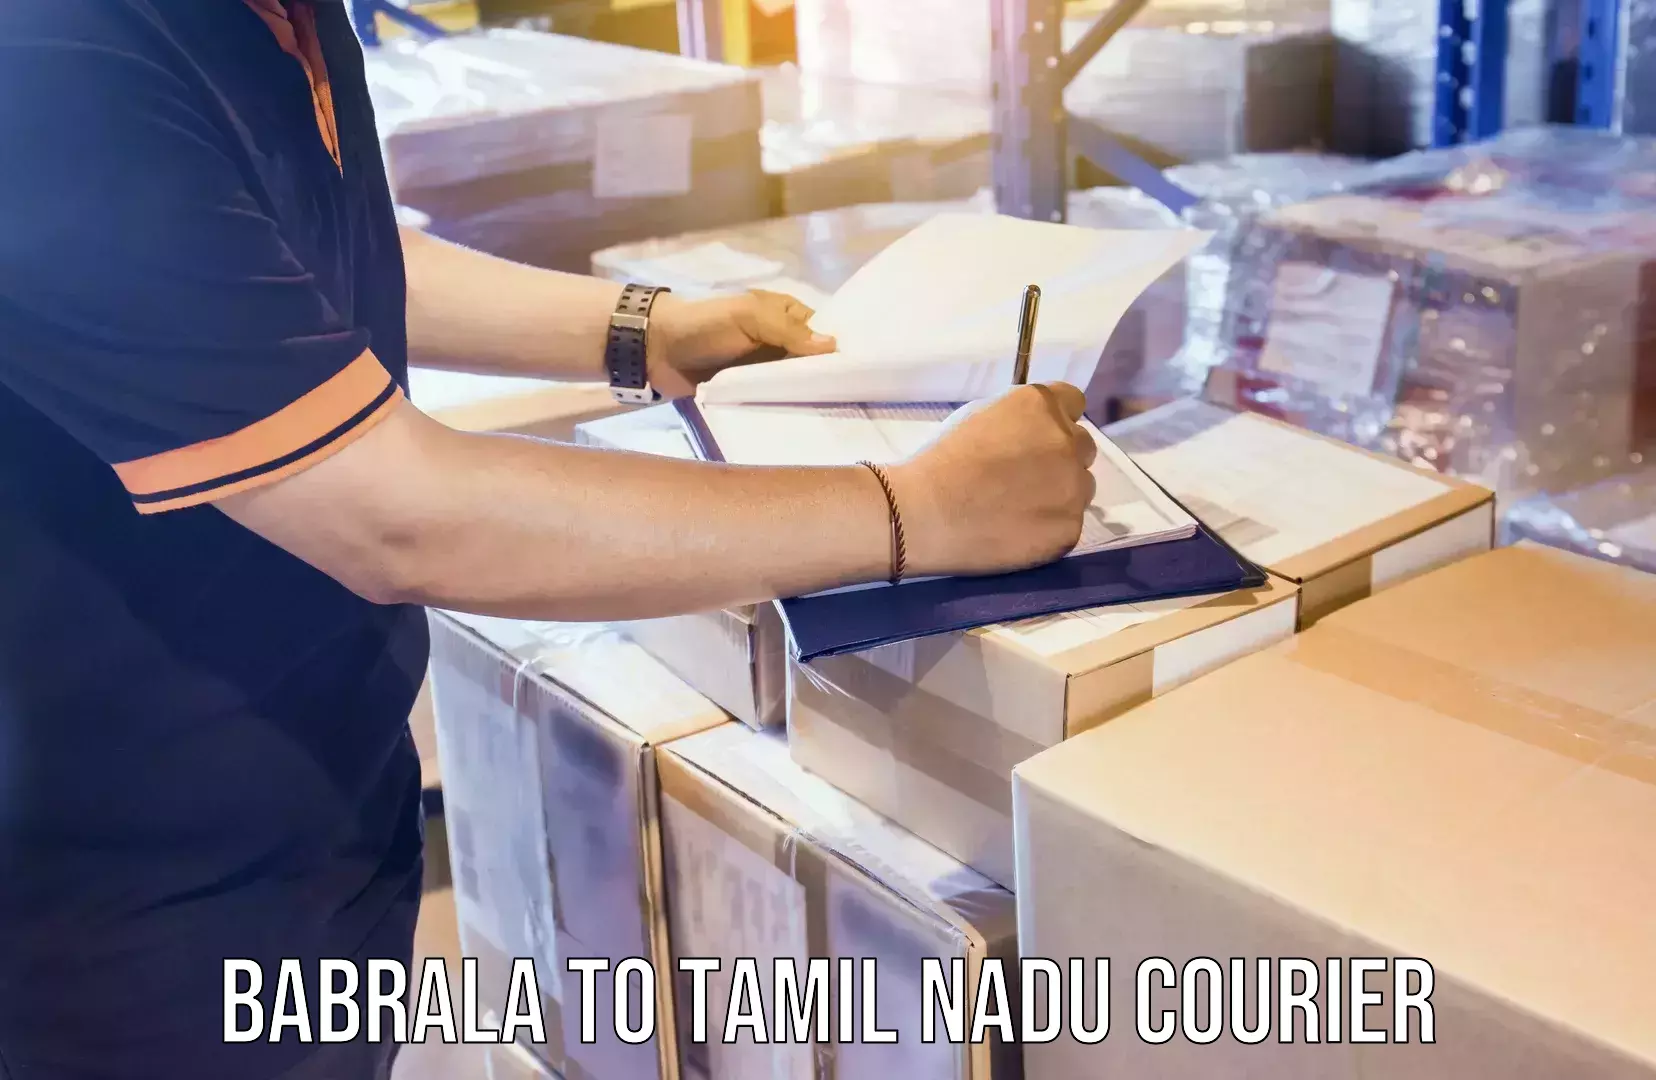 Next-day delivery options Babrala to Tamil Nadu